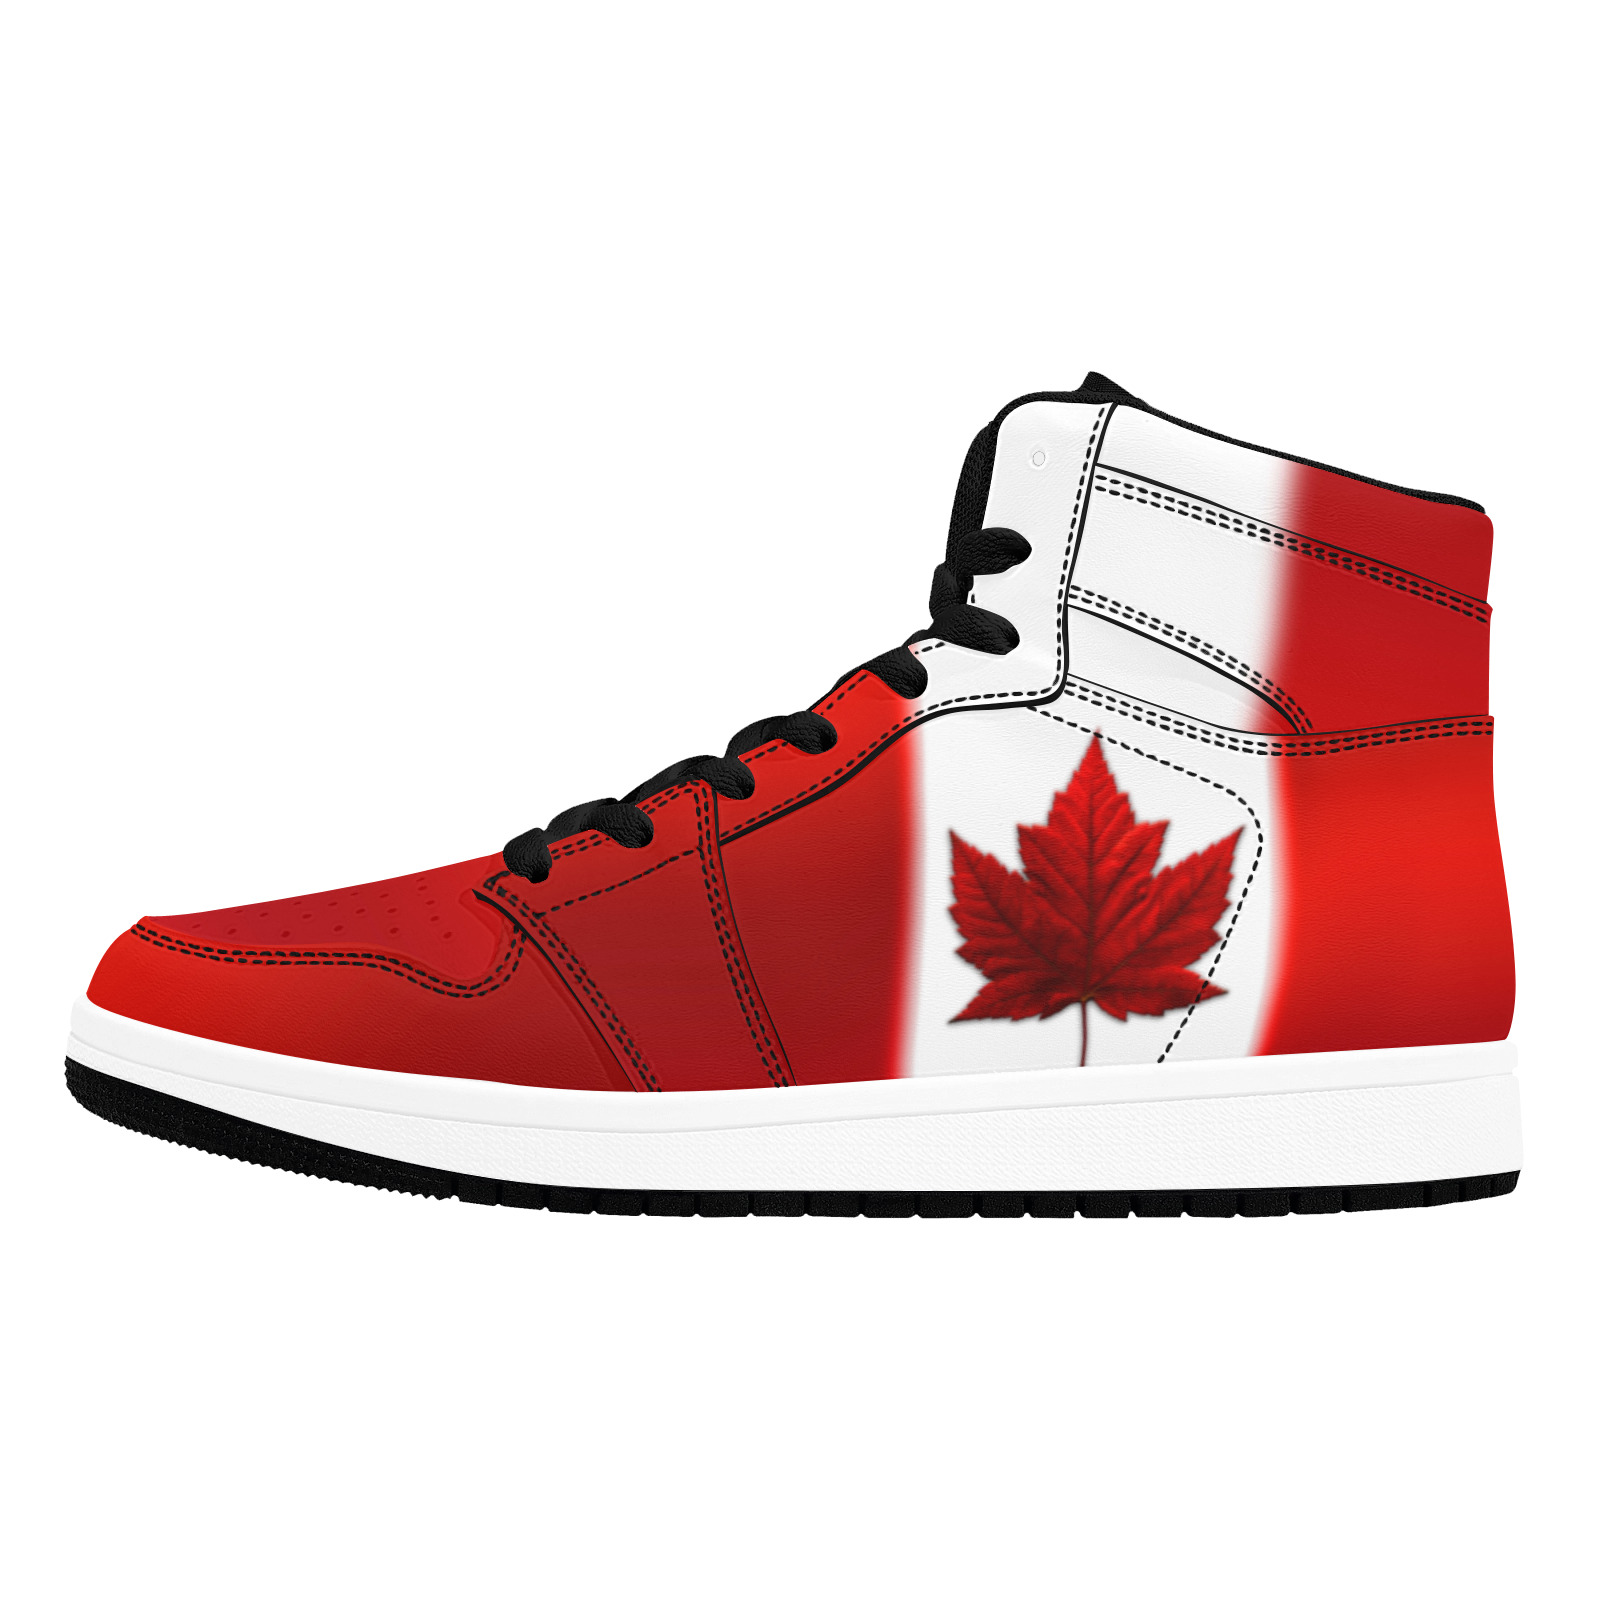 Canada Flag Sneakers Running Shoes Unisex High Top Sneakers (Model 20042)